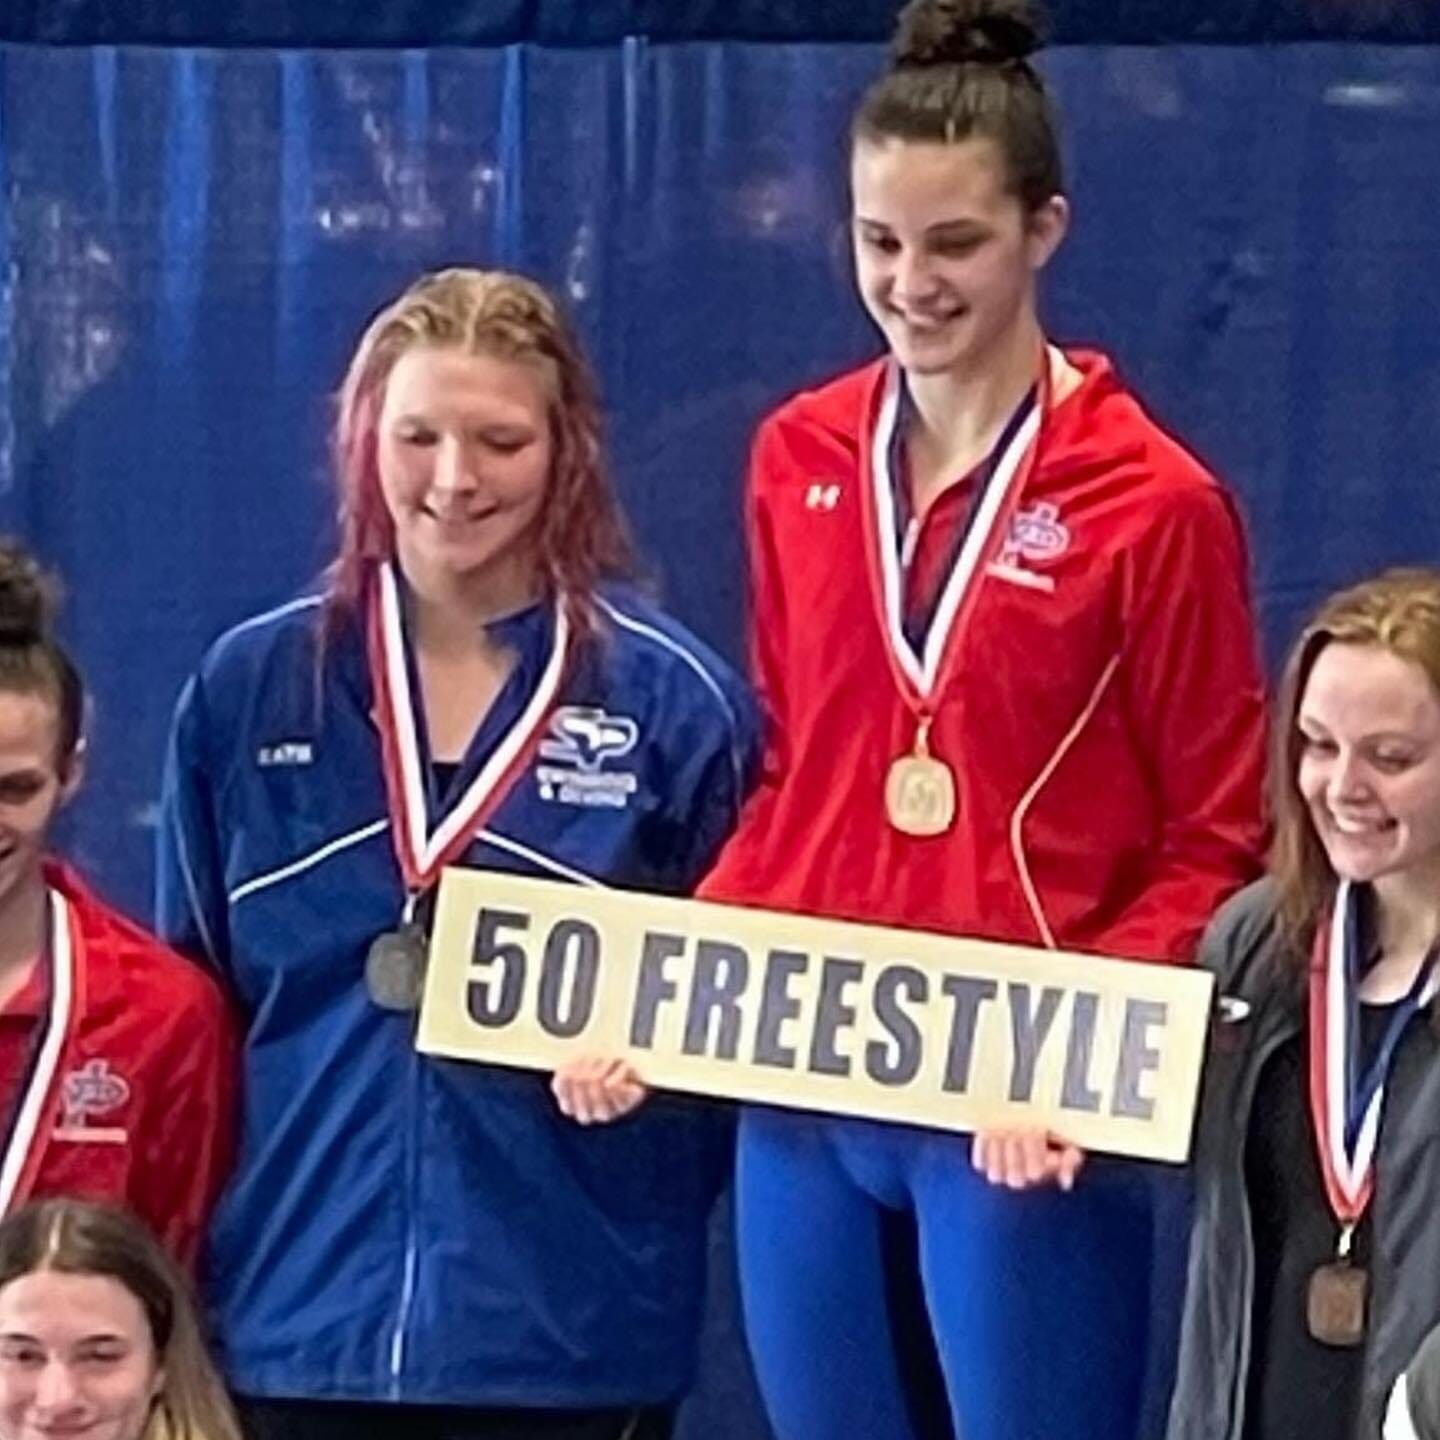 Podium of 50 free, Lilly King of Mt. Pleasant